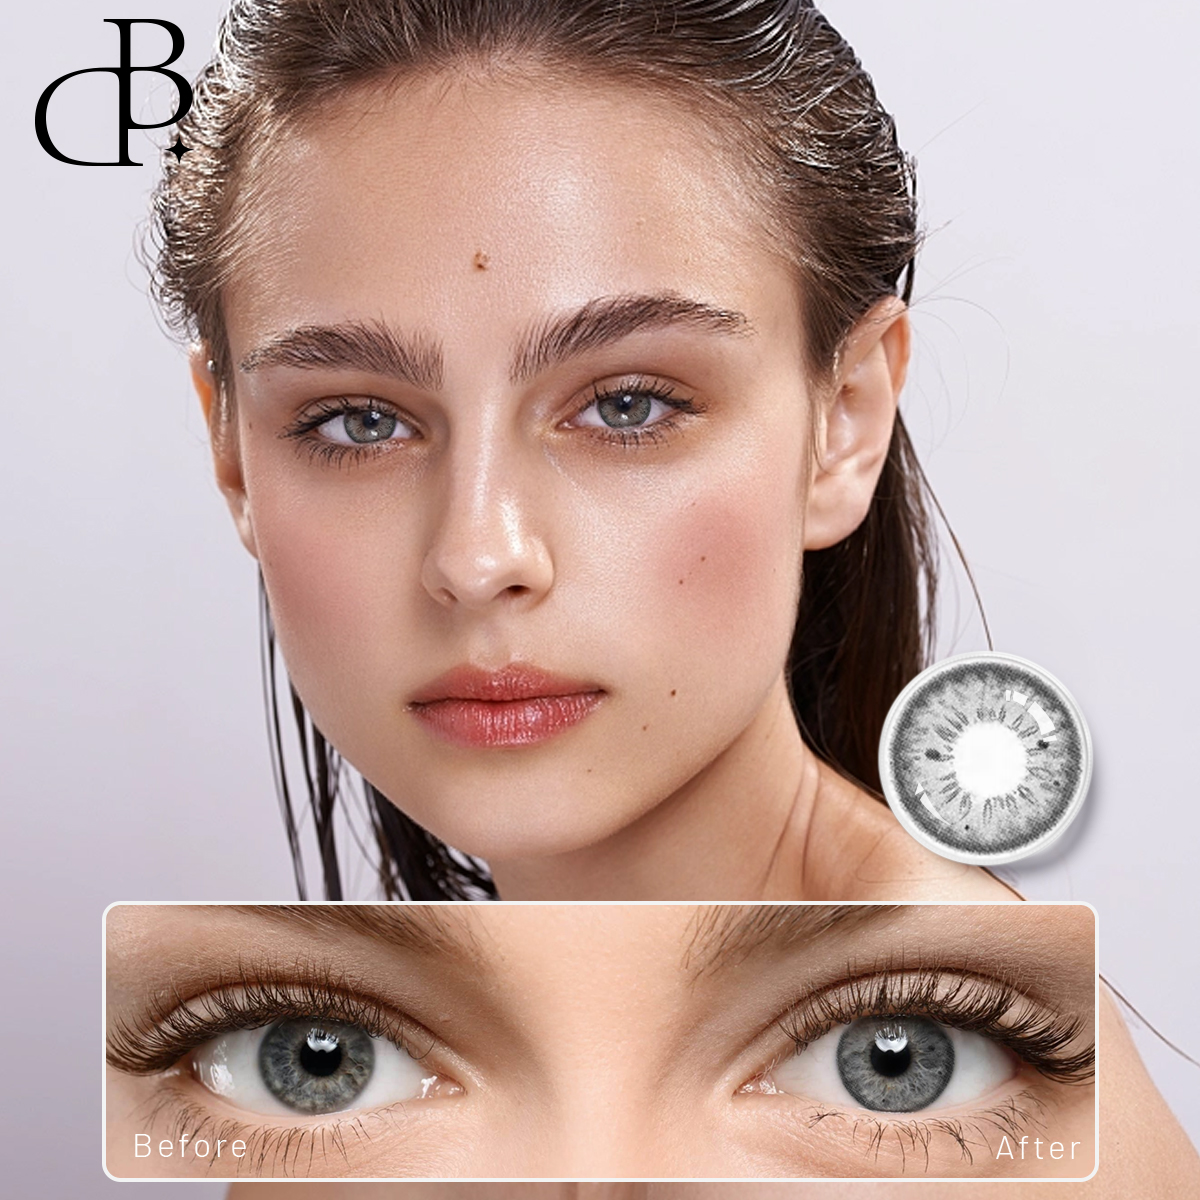 Dbeyes One Day Color Contact Lenses Colored Fashion Contact Lenses Cosmetic Lenses Wholesale